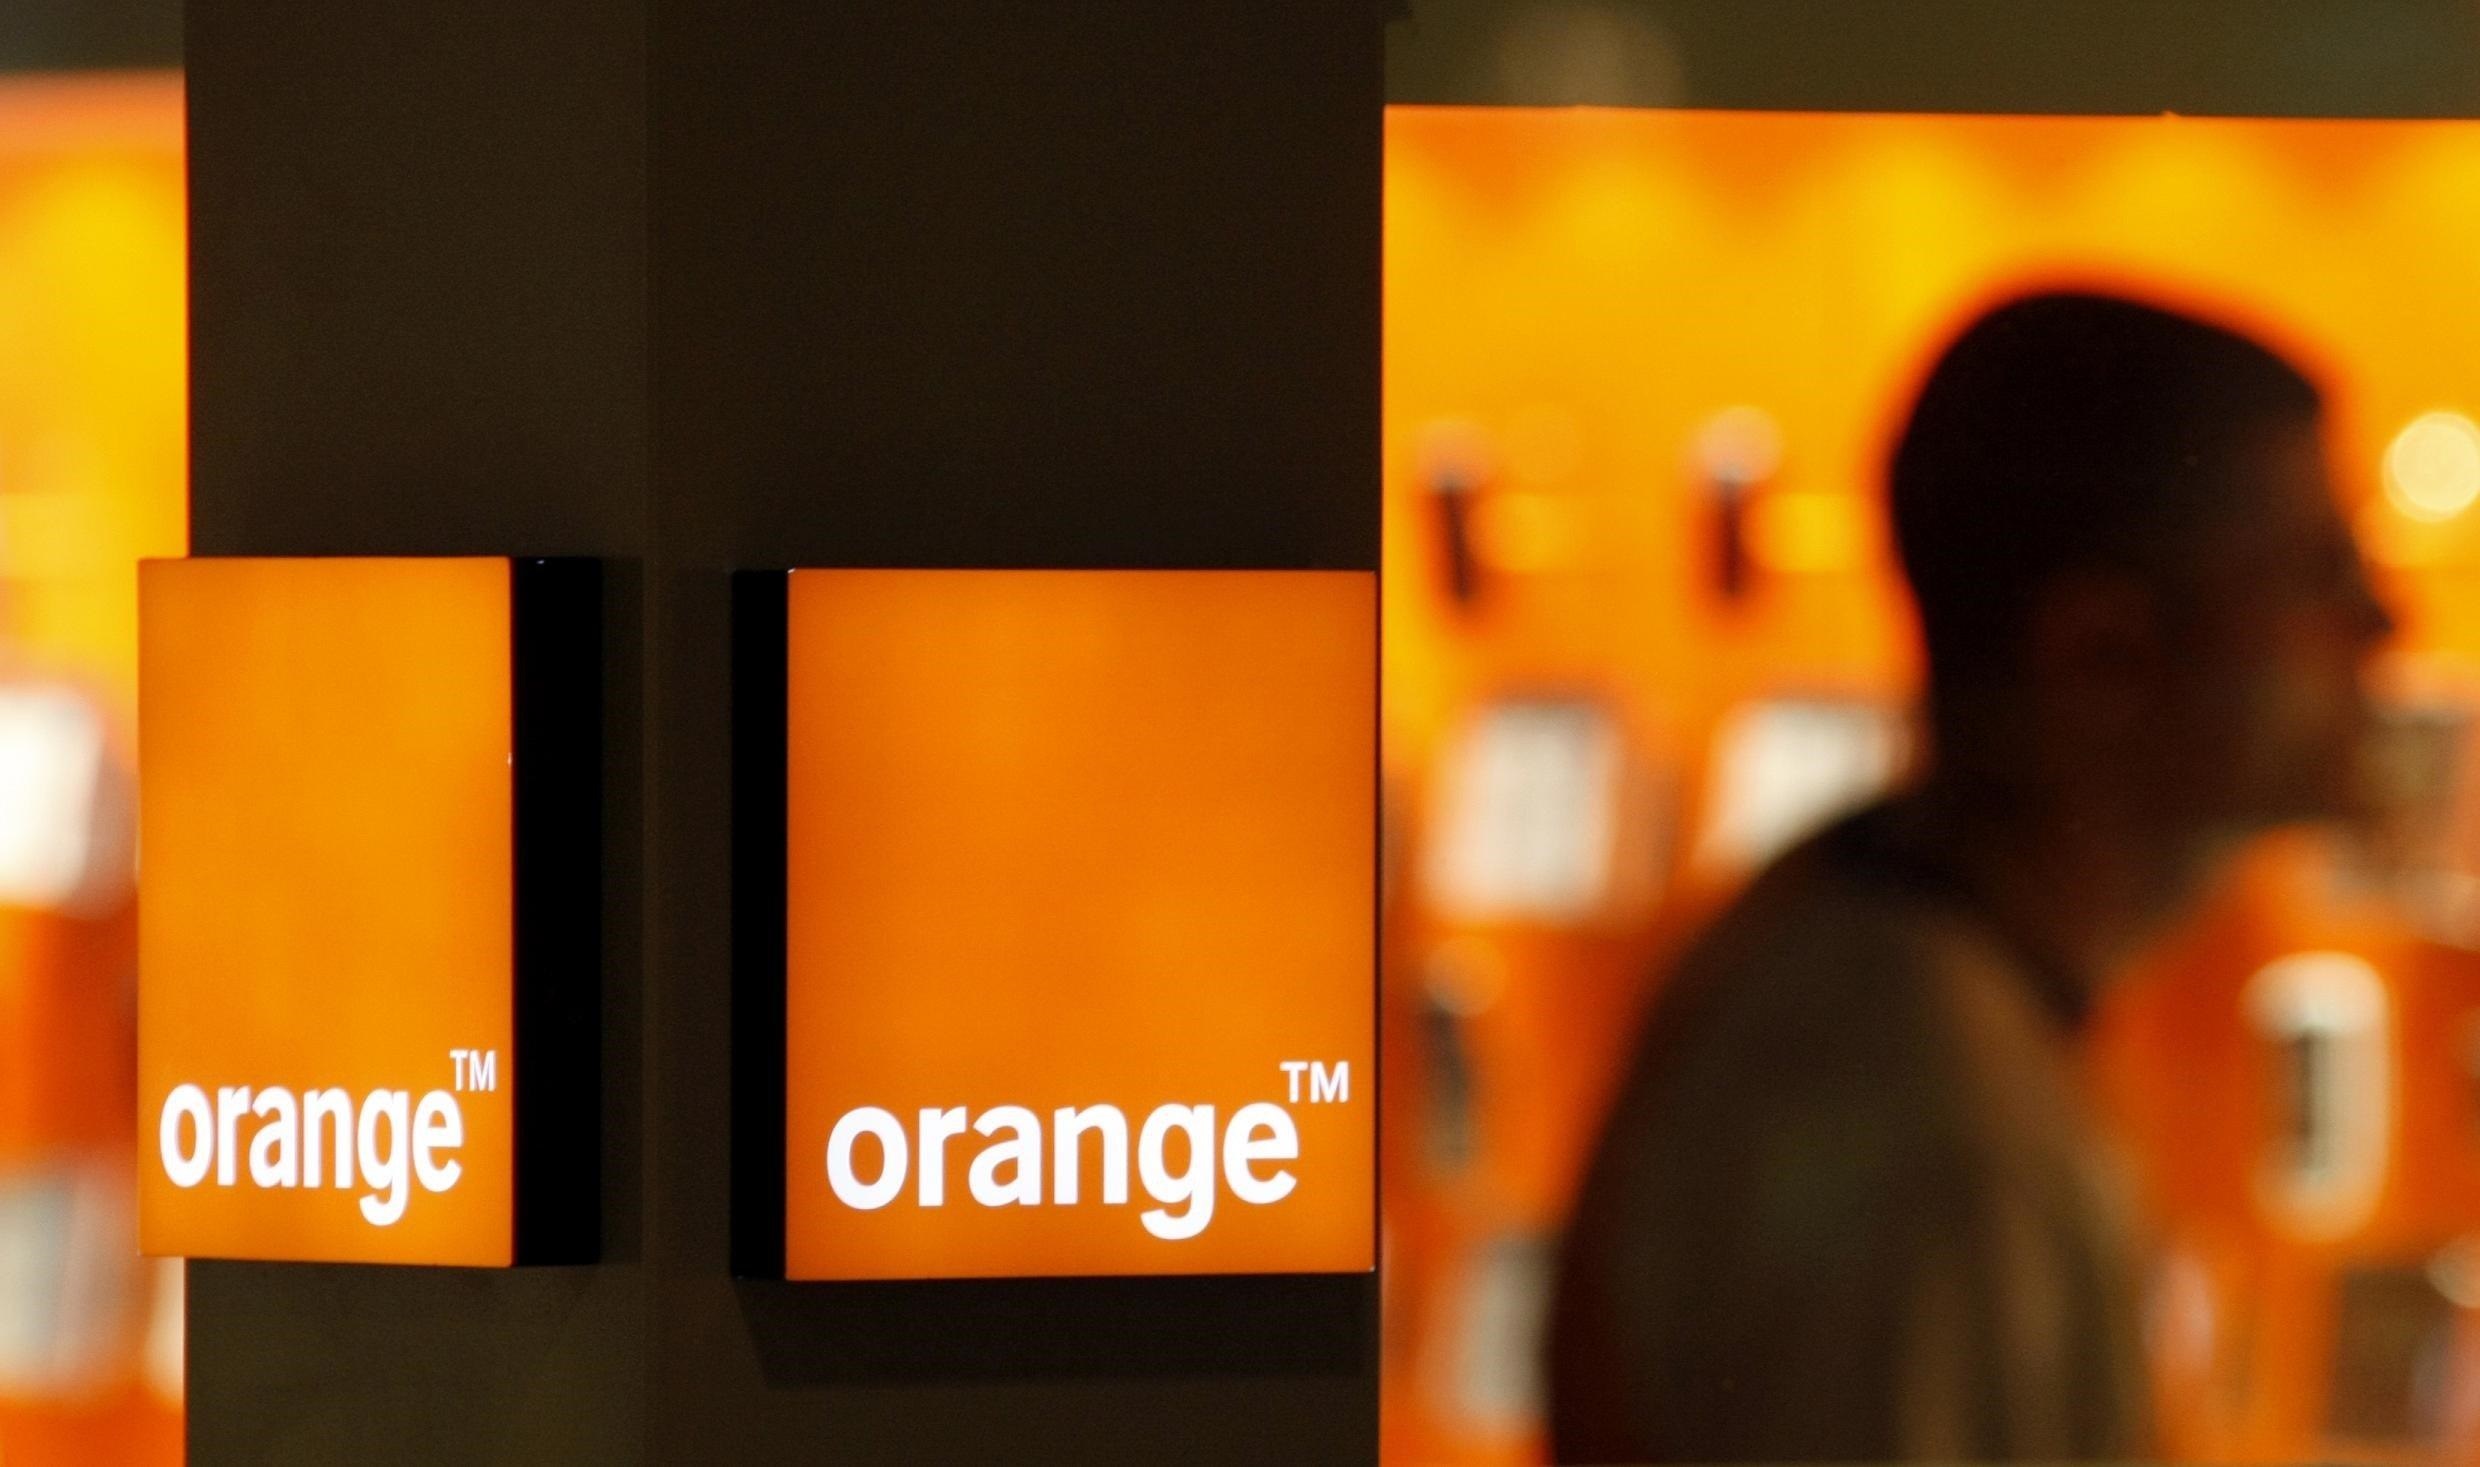 Orange, the leading mobile network for voice calls, SMS and mobile internet in Reunion